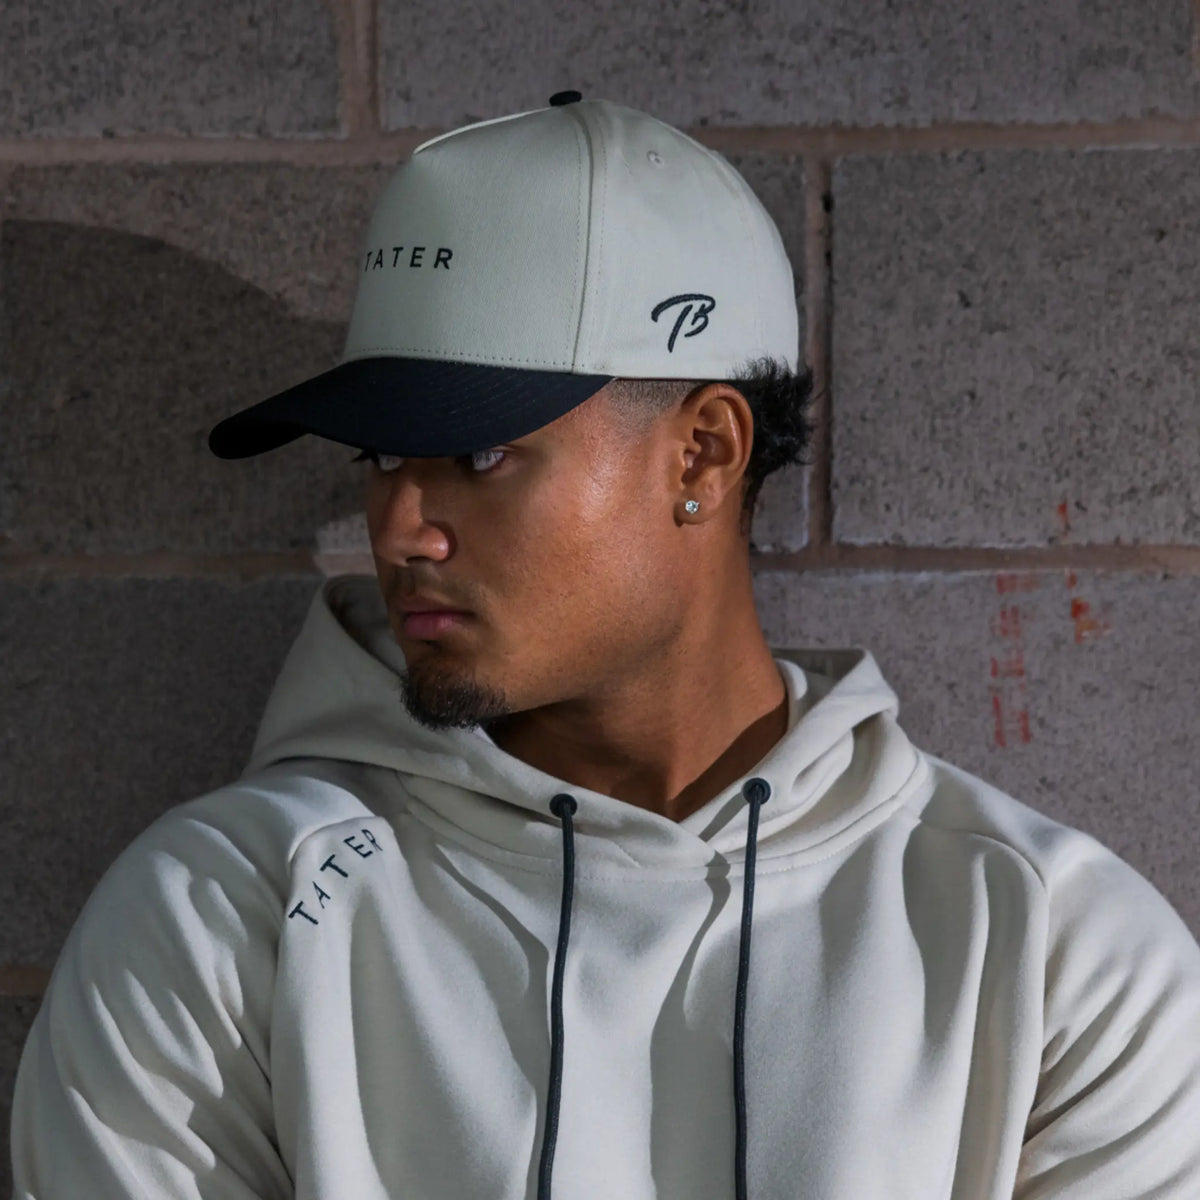 In this image, the subject is wearing a cream-colored snapback hat with the &quot;Tater&quot; logo in black, which matches the hoodie&#39;s color and branding. The hat&#39;s bill is black, creating a stylish contrast. The person&#39;s sideways glance adds a contemplative or focused ambiance to the photo. The lighting accentuates the textures and colors of the apparel, and the background&#39;s muted tones allow the Tater Baseball brand elements to stand out, emphasizing a fusion of casual style and athletic wear.